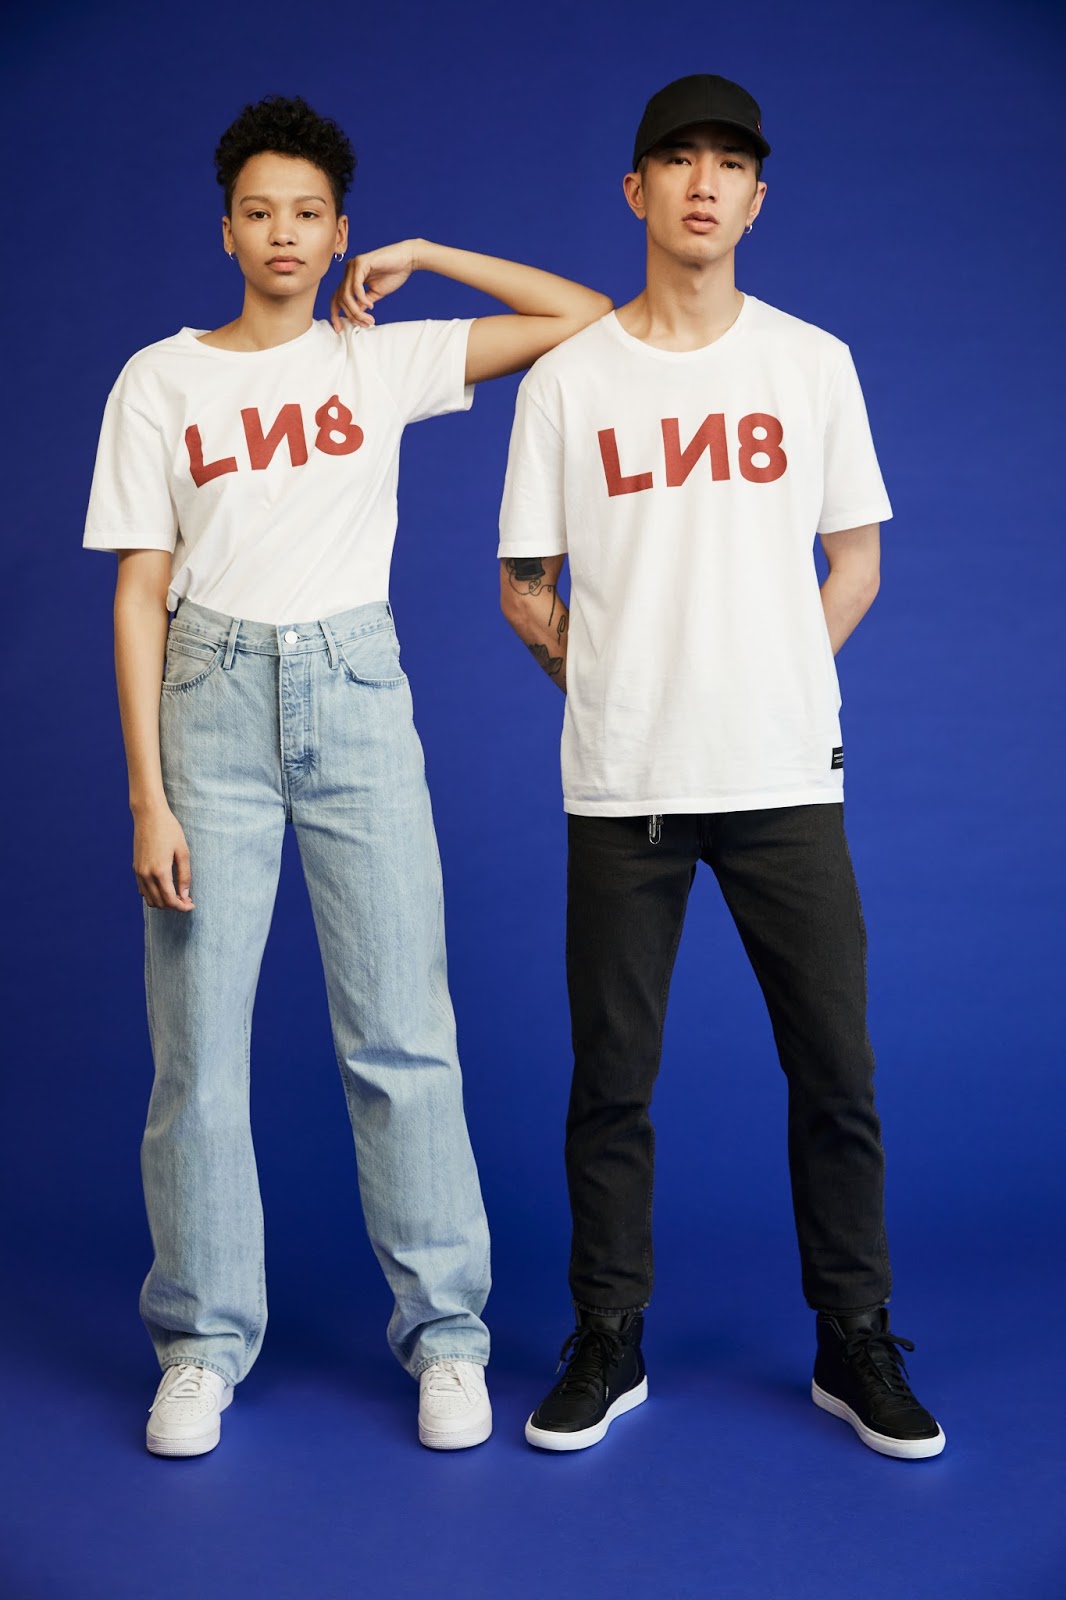 Swag Craze: Levi’s Drop More Pieces For 2017 With Their Line 8 Collection